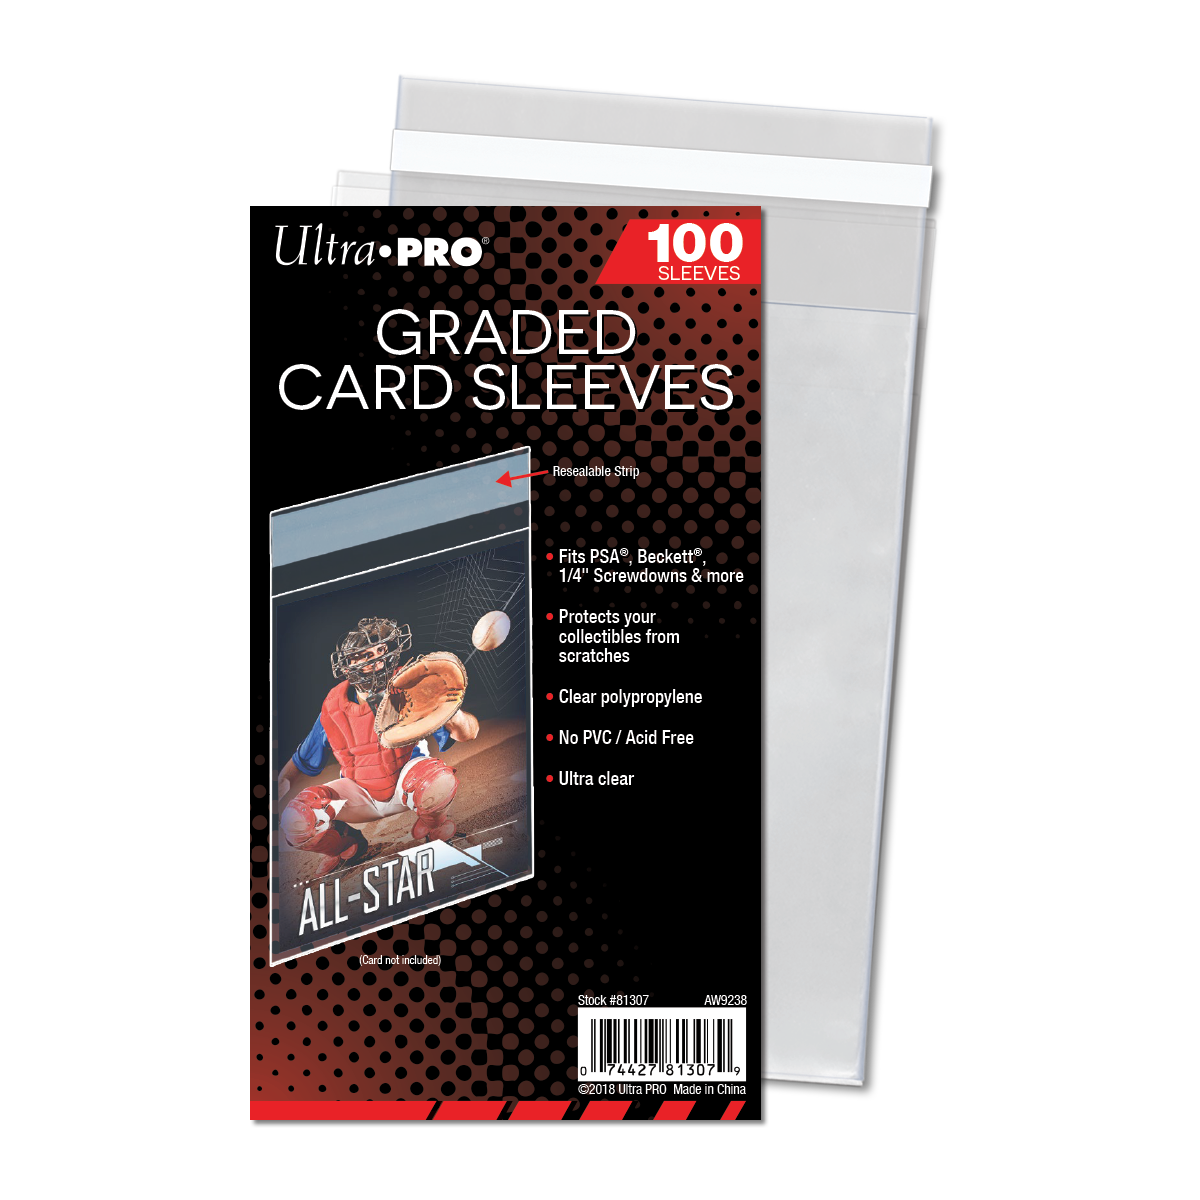 Ultra Pro Graded Card Sleeves Resealable